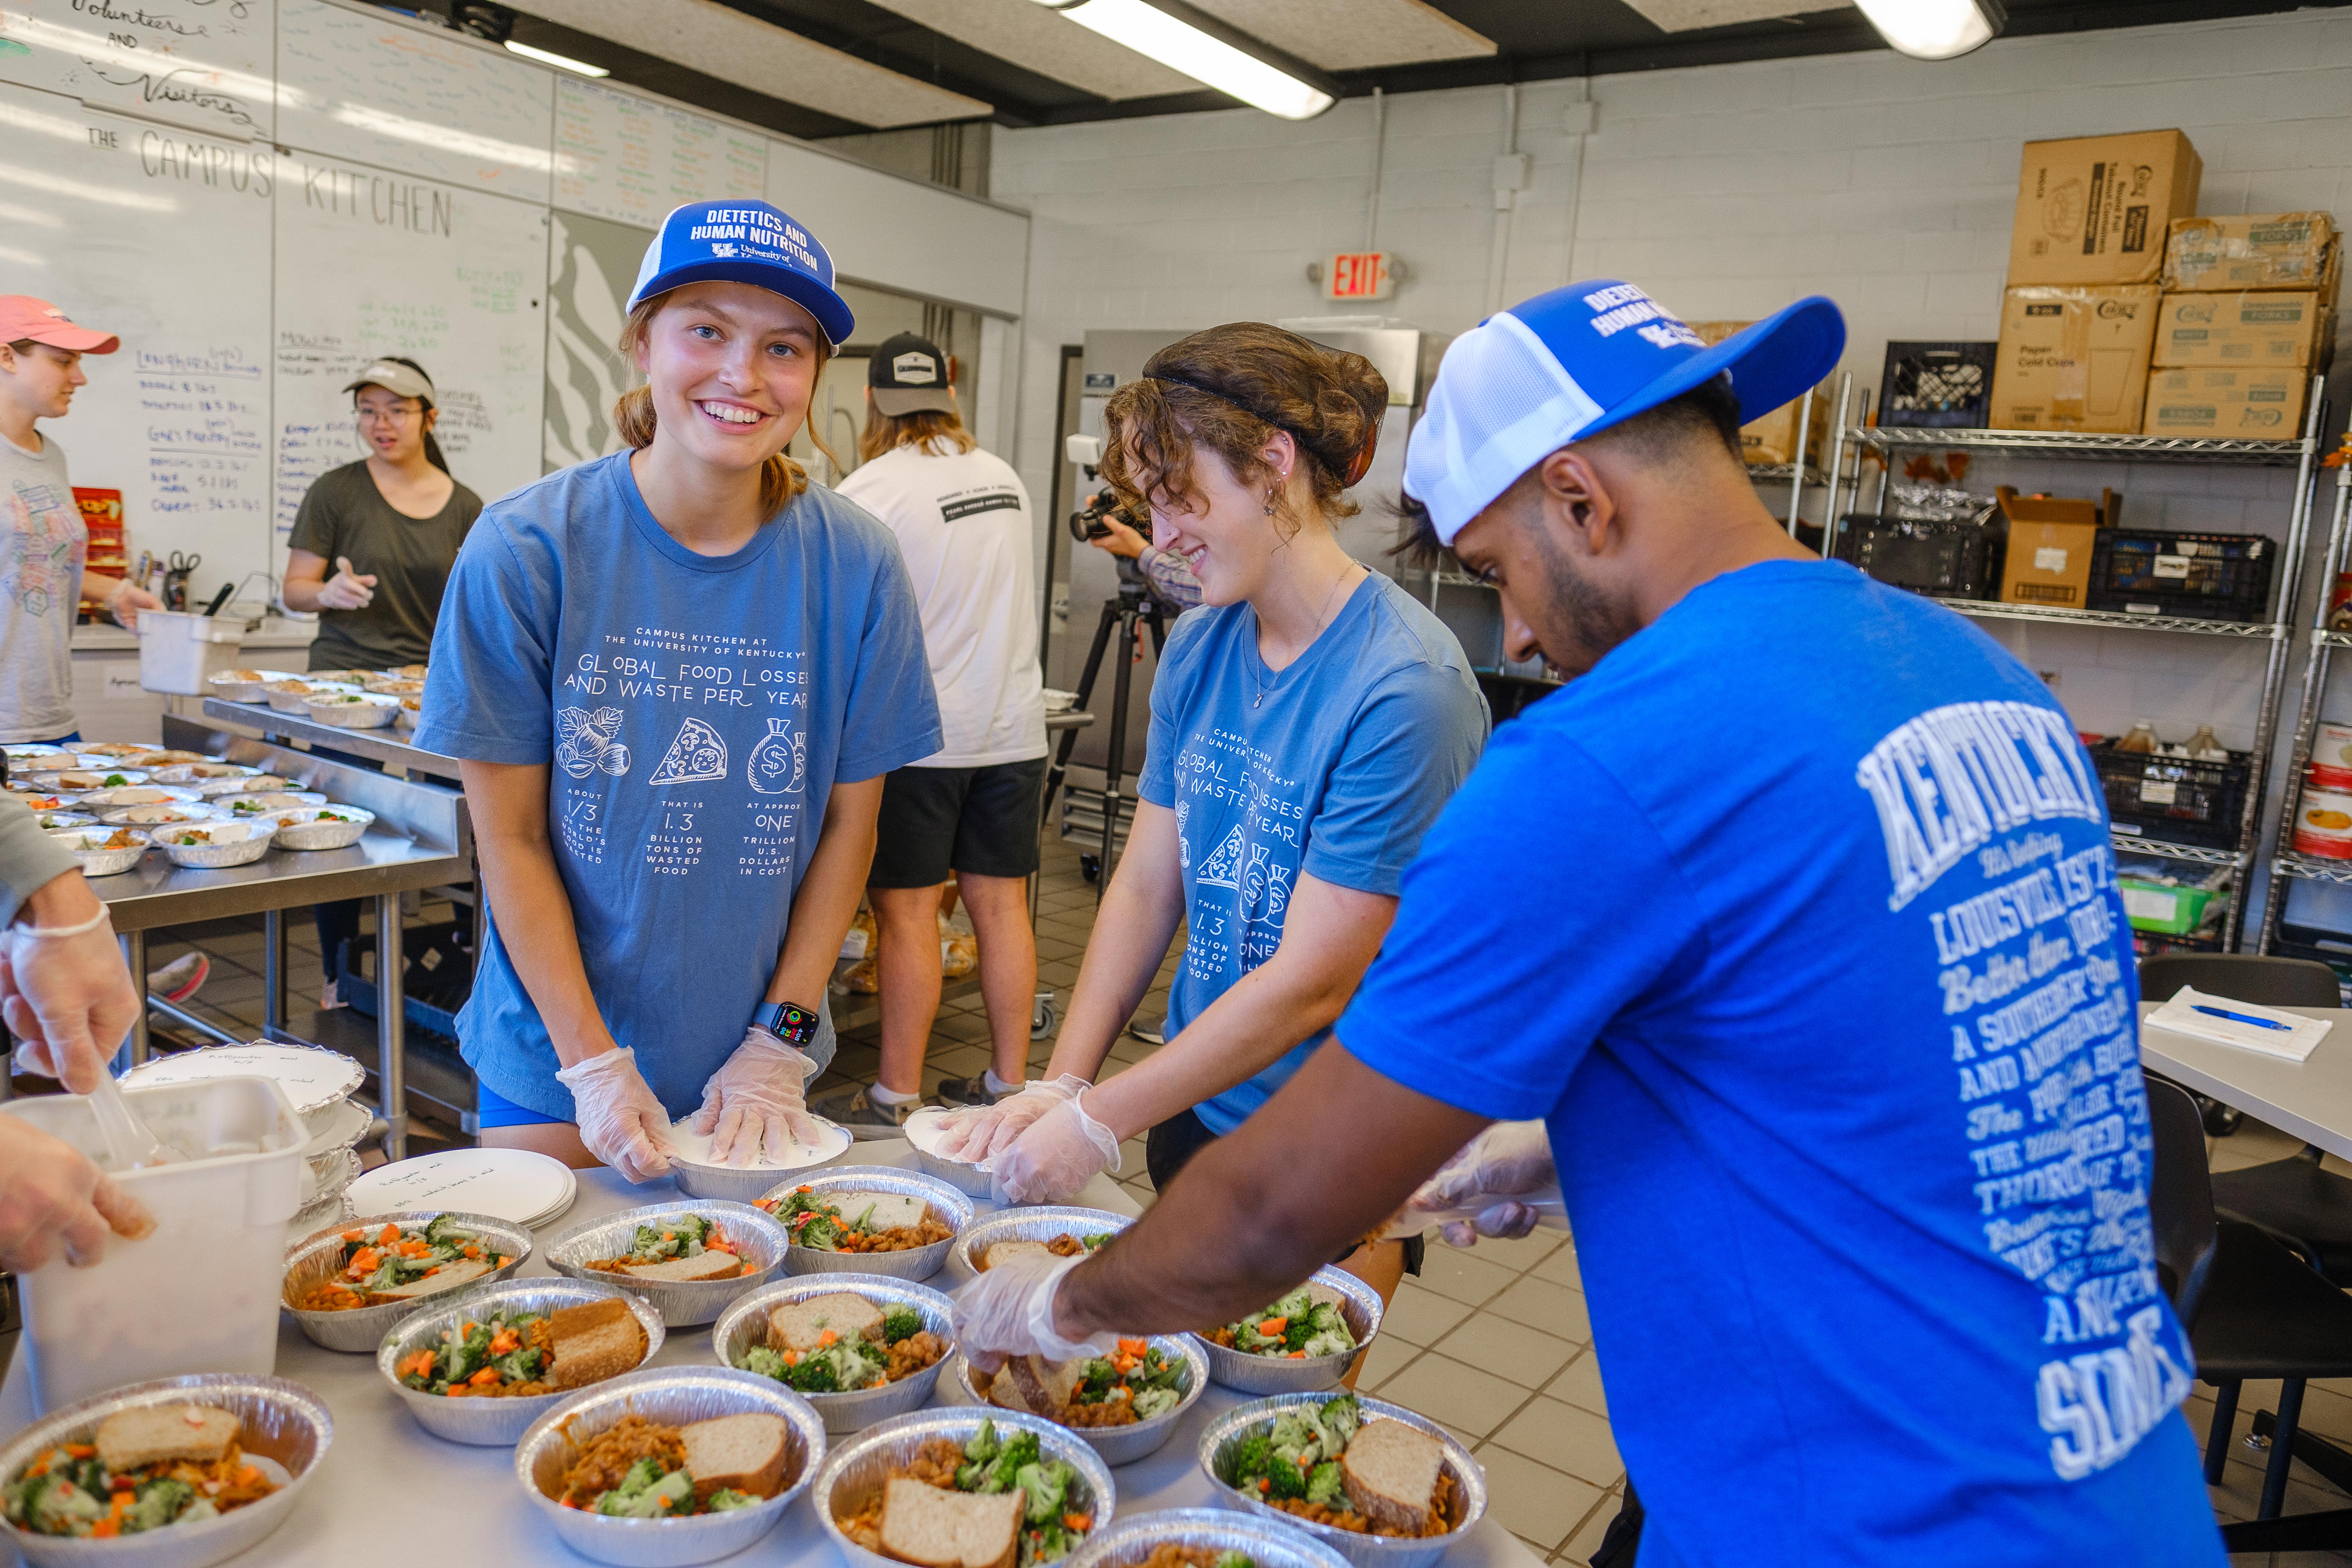 UK Dietetics students Olivia Kobal and Grace Wise in the Meals on Wings program prepared health meals with extra food from UK Healthcare Food Services